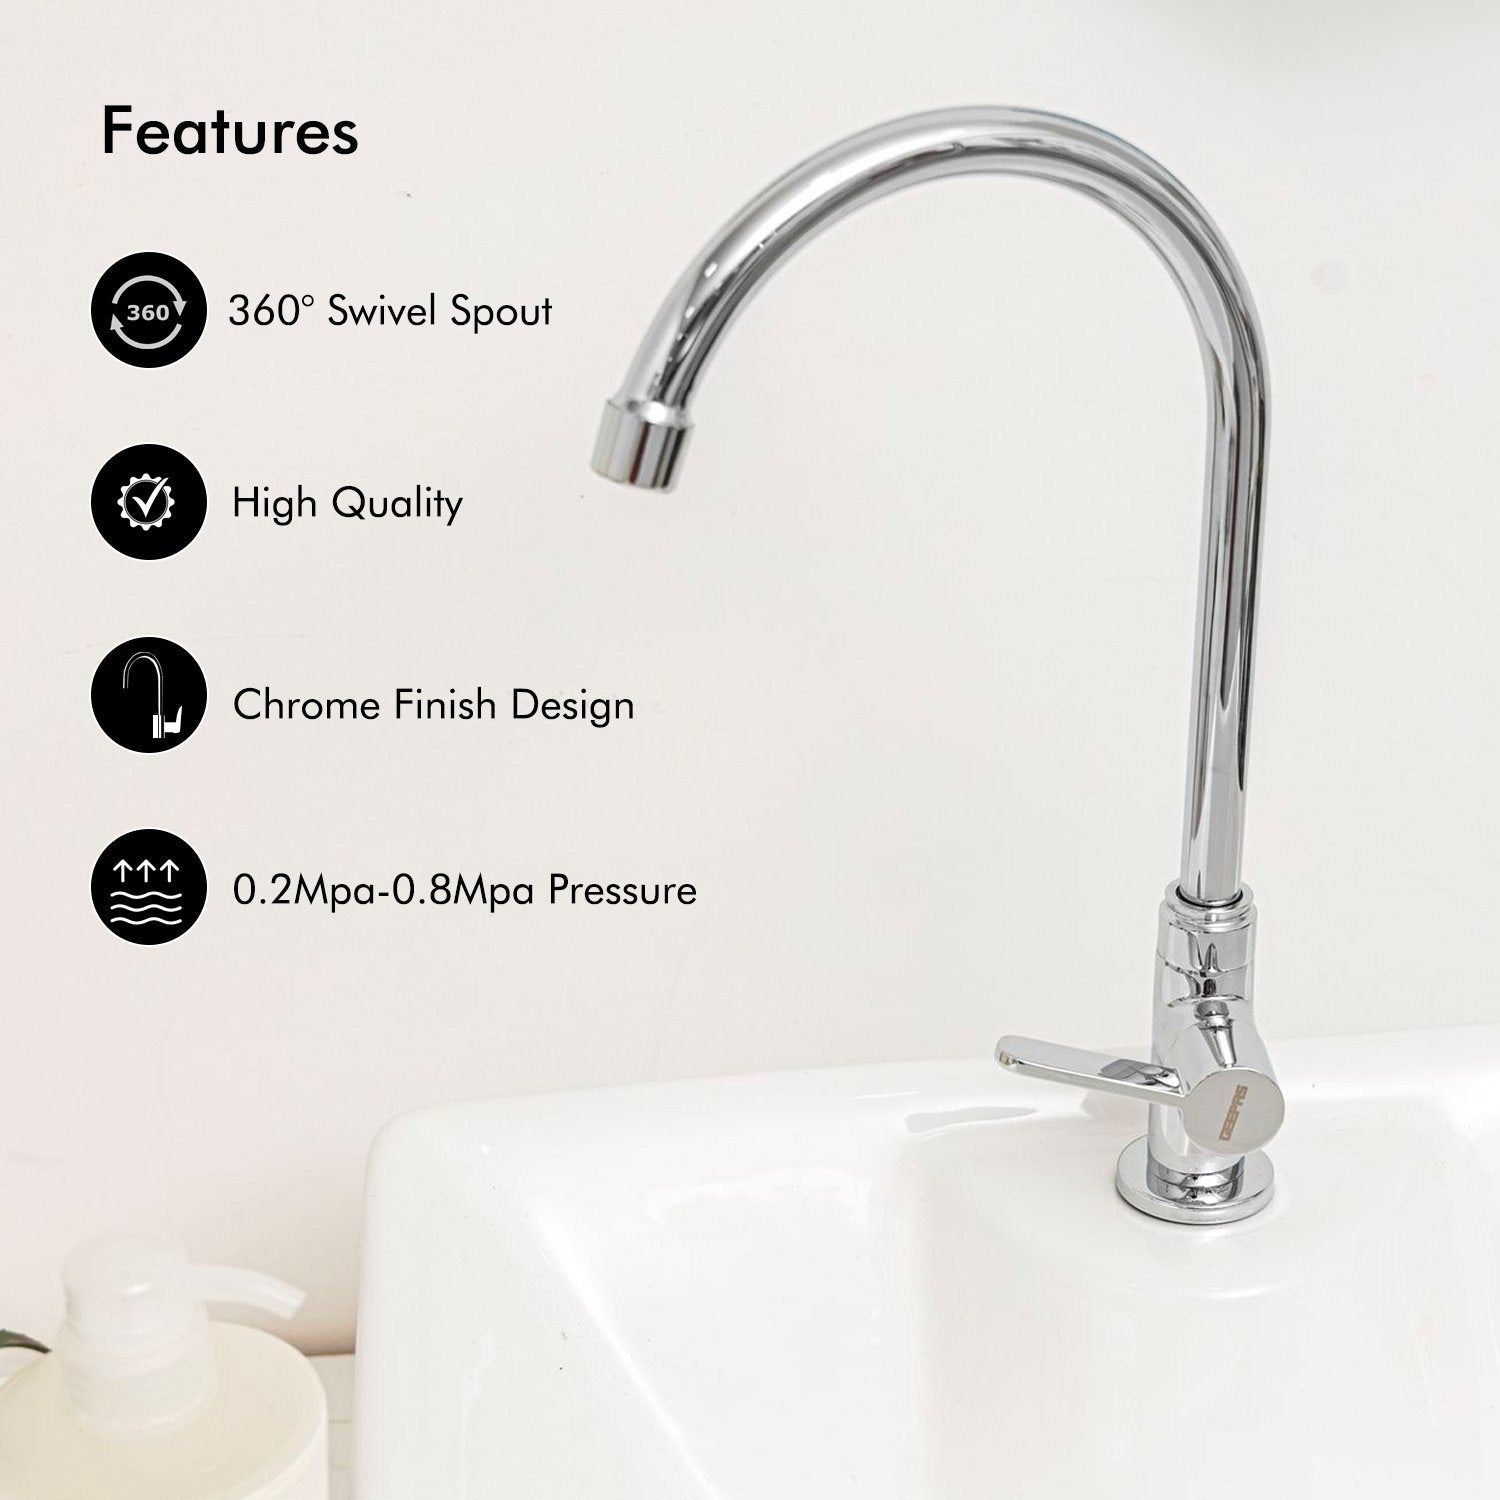 Kitchen Sink Tap Stainless Steel - GSW61012 Kitchen Fixtures Geepas | For you. For life. 